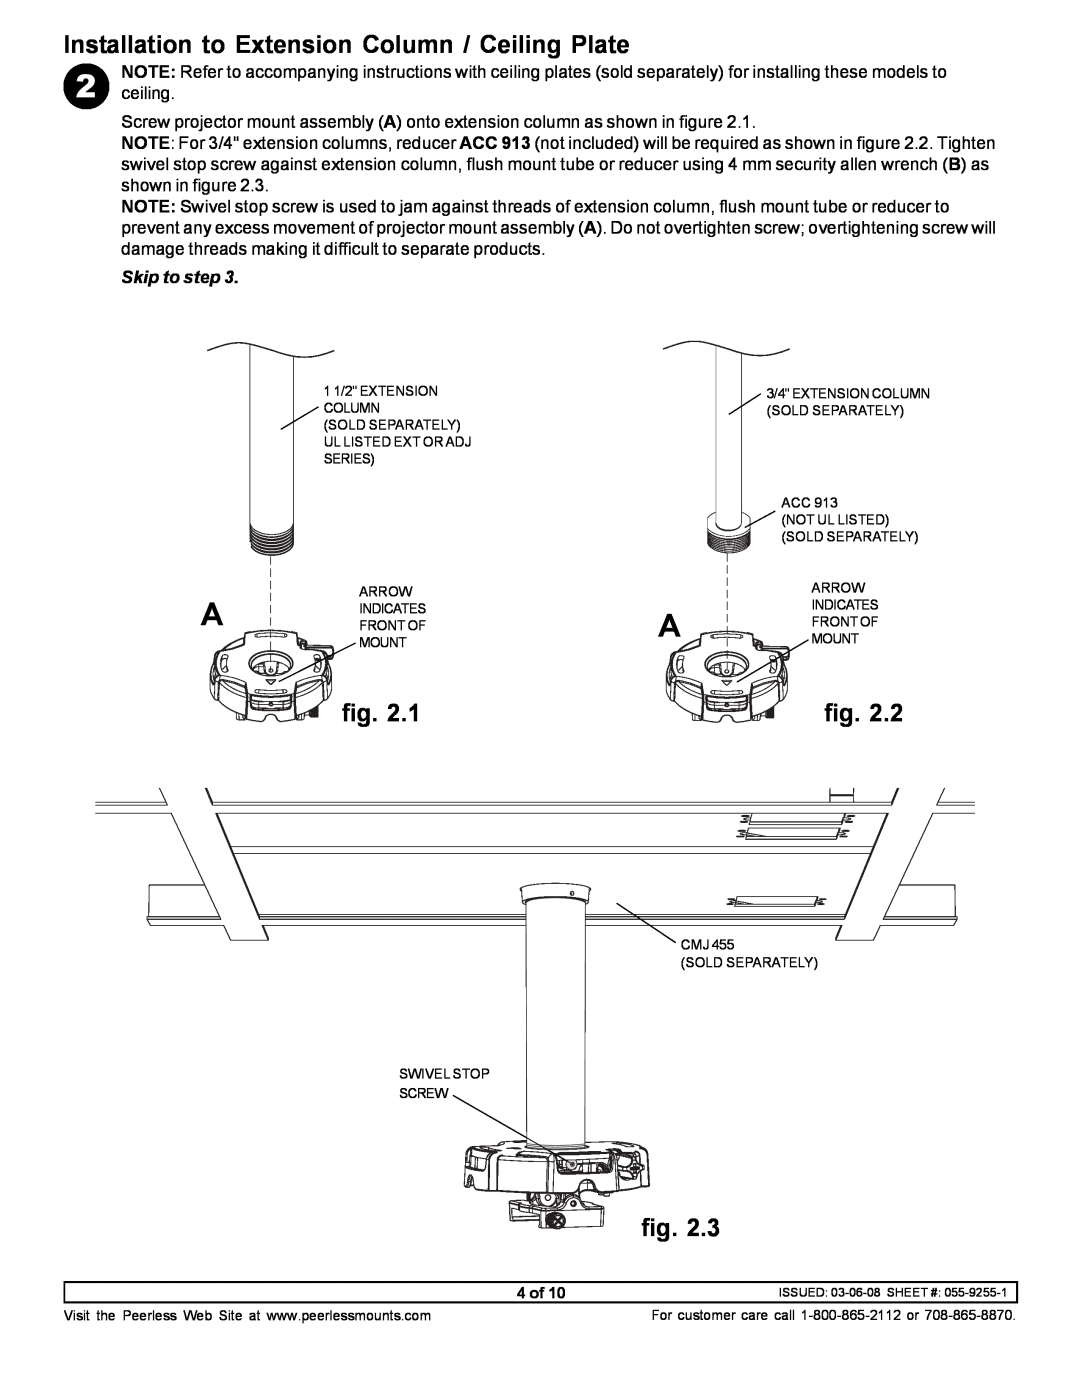 NEC NP900CM manual Installation to Extension Column / Ceiling Plate, Skip to step, ceiling 